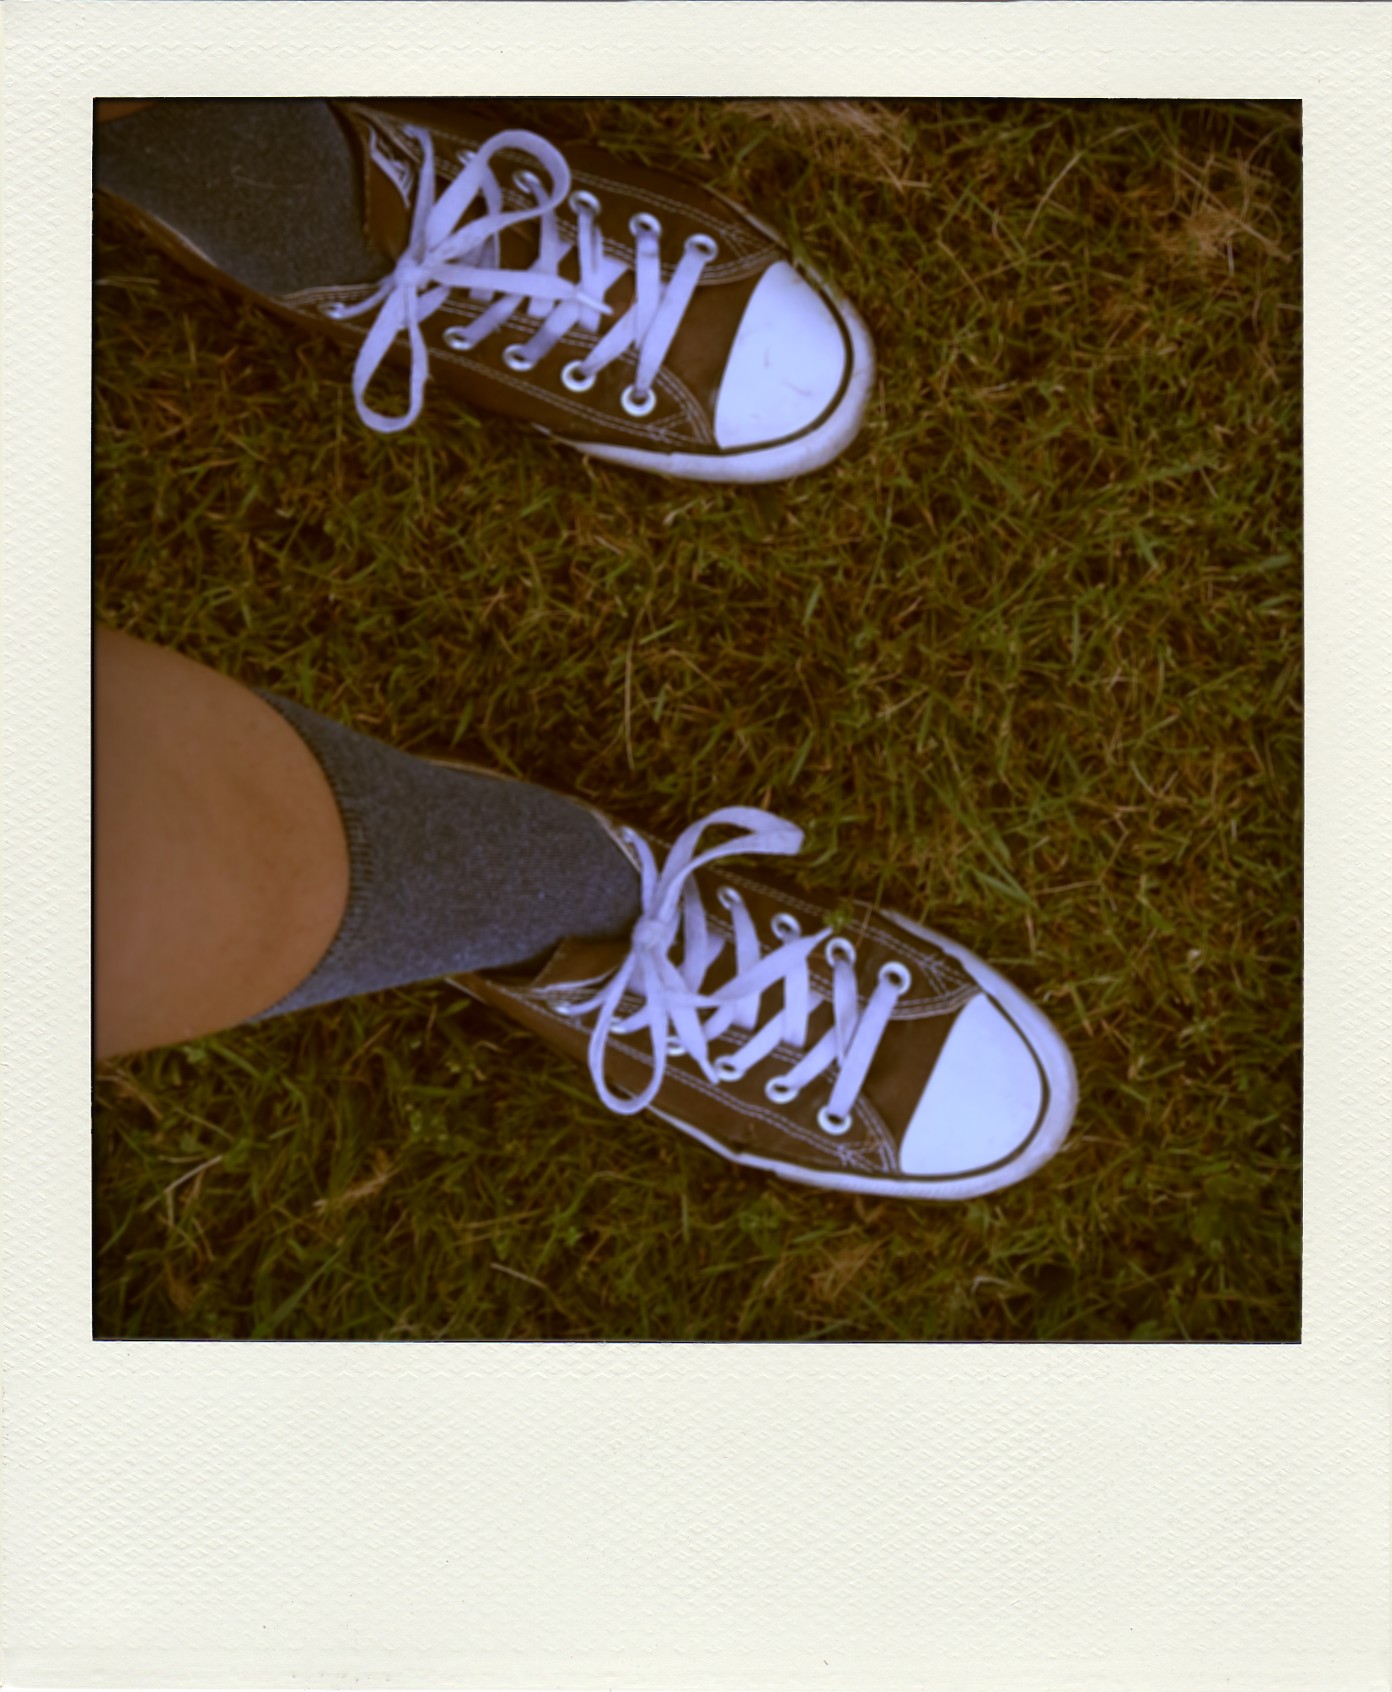 My feet on the grass. I'm wearing black Converse sneakers and dark blue socks.